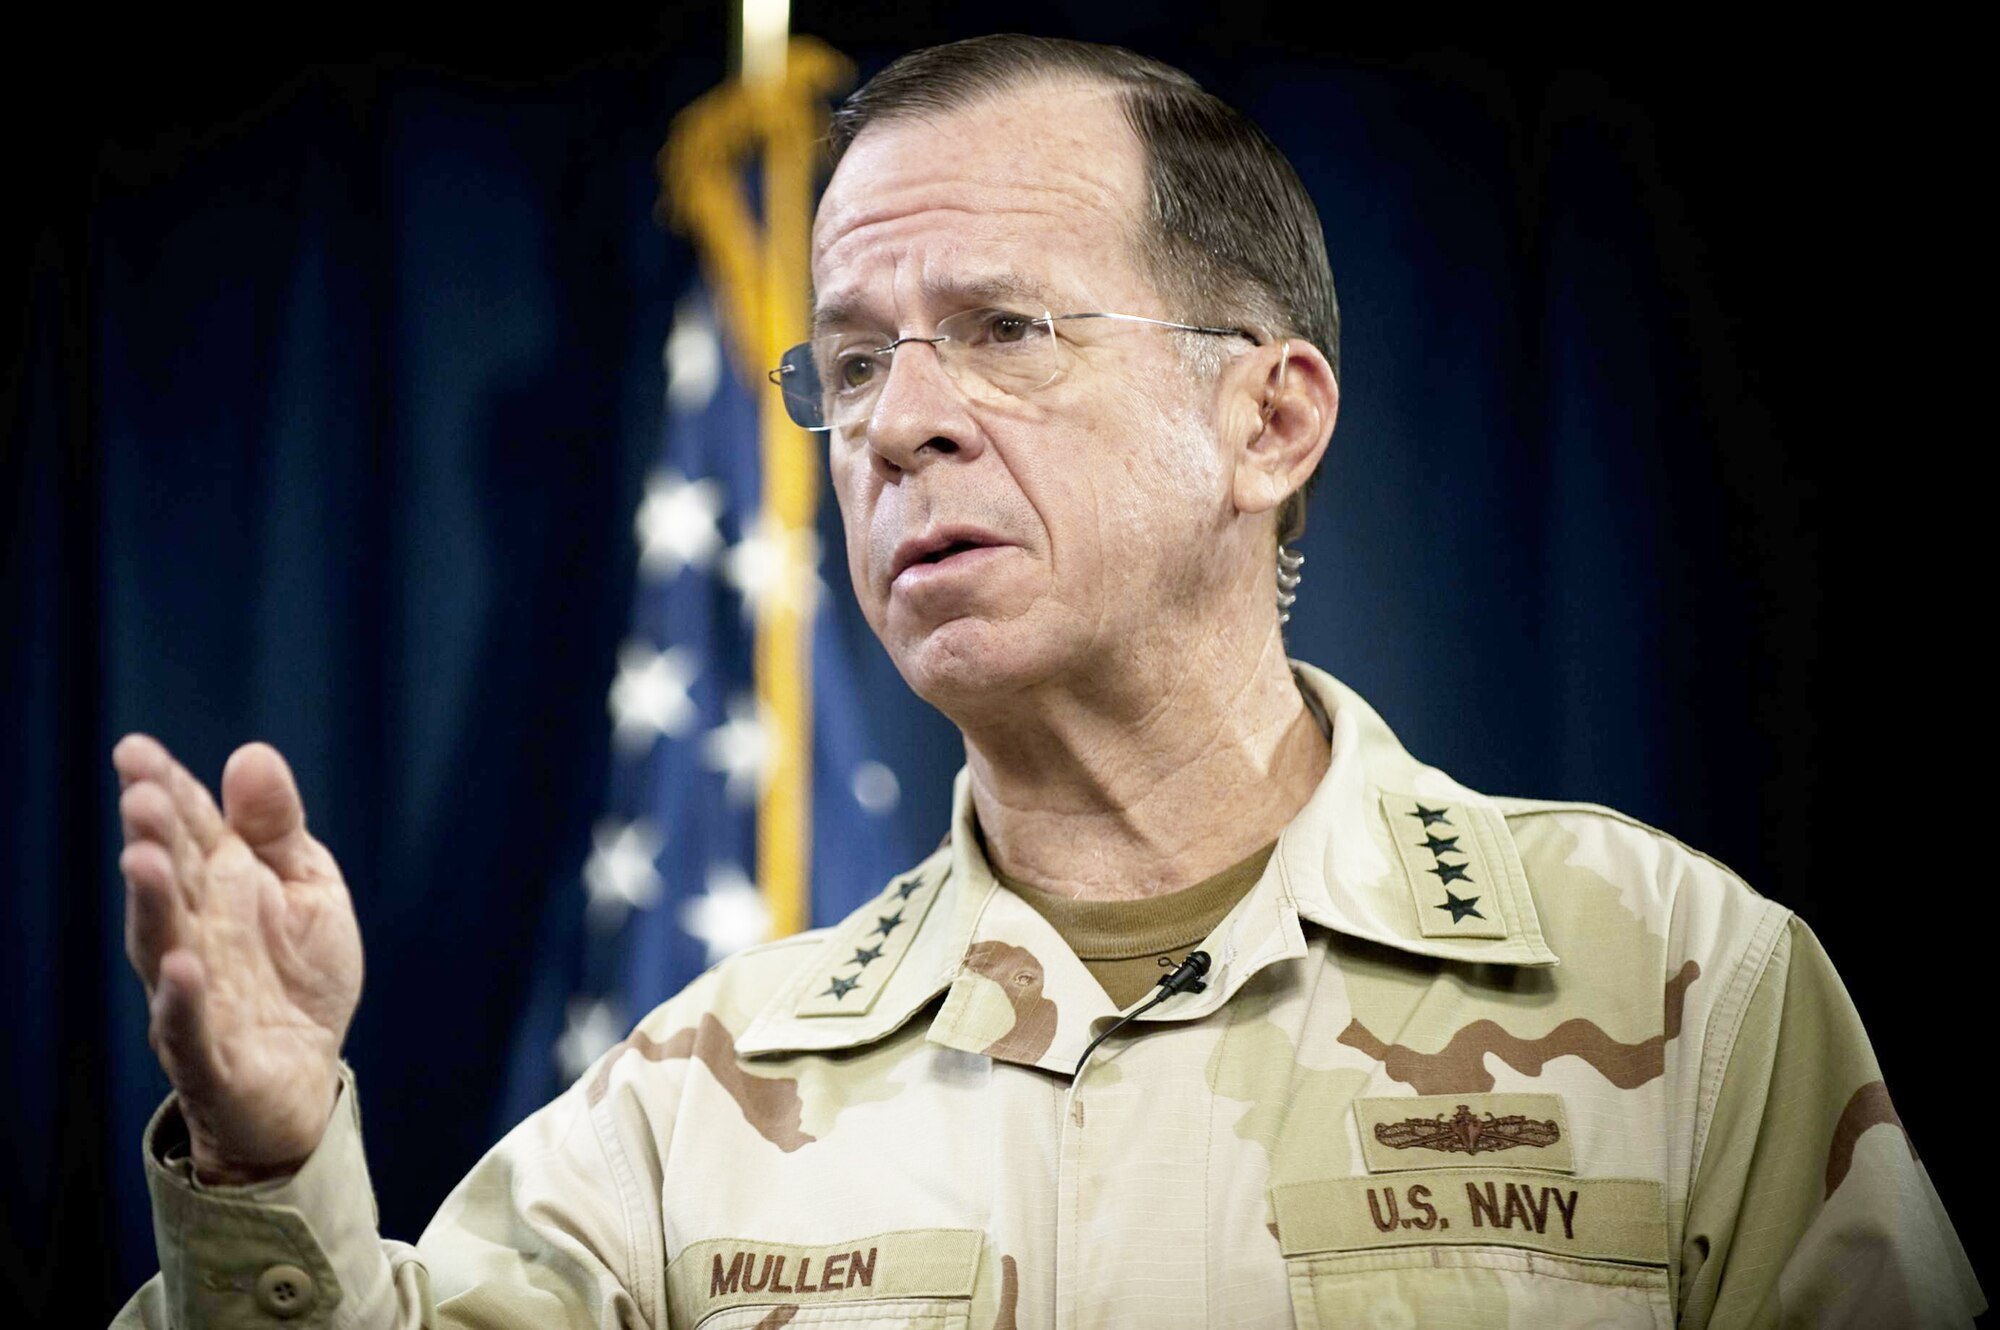 Chairman of the Joint Chiefs of Staff Adm. Mike Mullen, shown in this file photo, said it is extremely important to find rapid health care solutions for servicemembers and their families and to ensure they understand that seeking help is a sign of strength. He was addressing more than 3,000 military and civilian medical professionals Jan. 25 during the 2010 Military Health System Conference in Maryland.  (Defense Department photo/Petty Officer 1st Class Chad J. McNeeley)